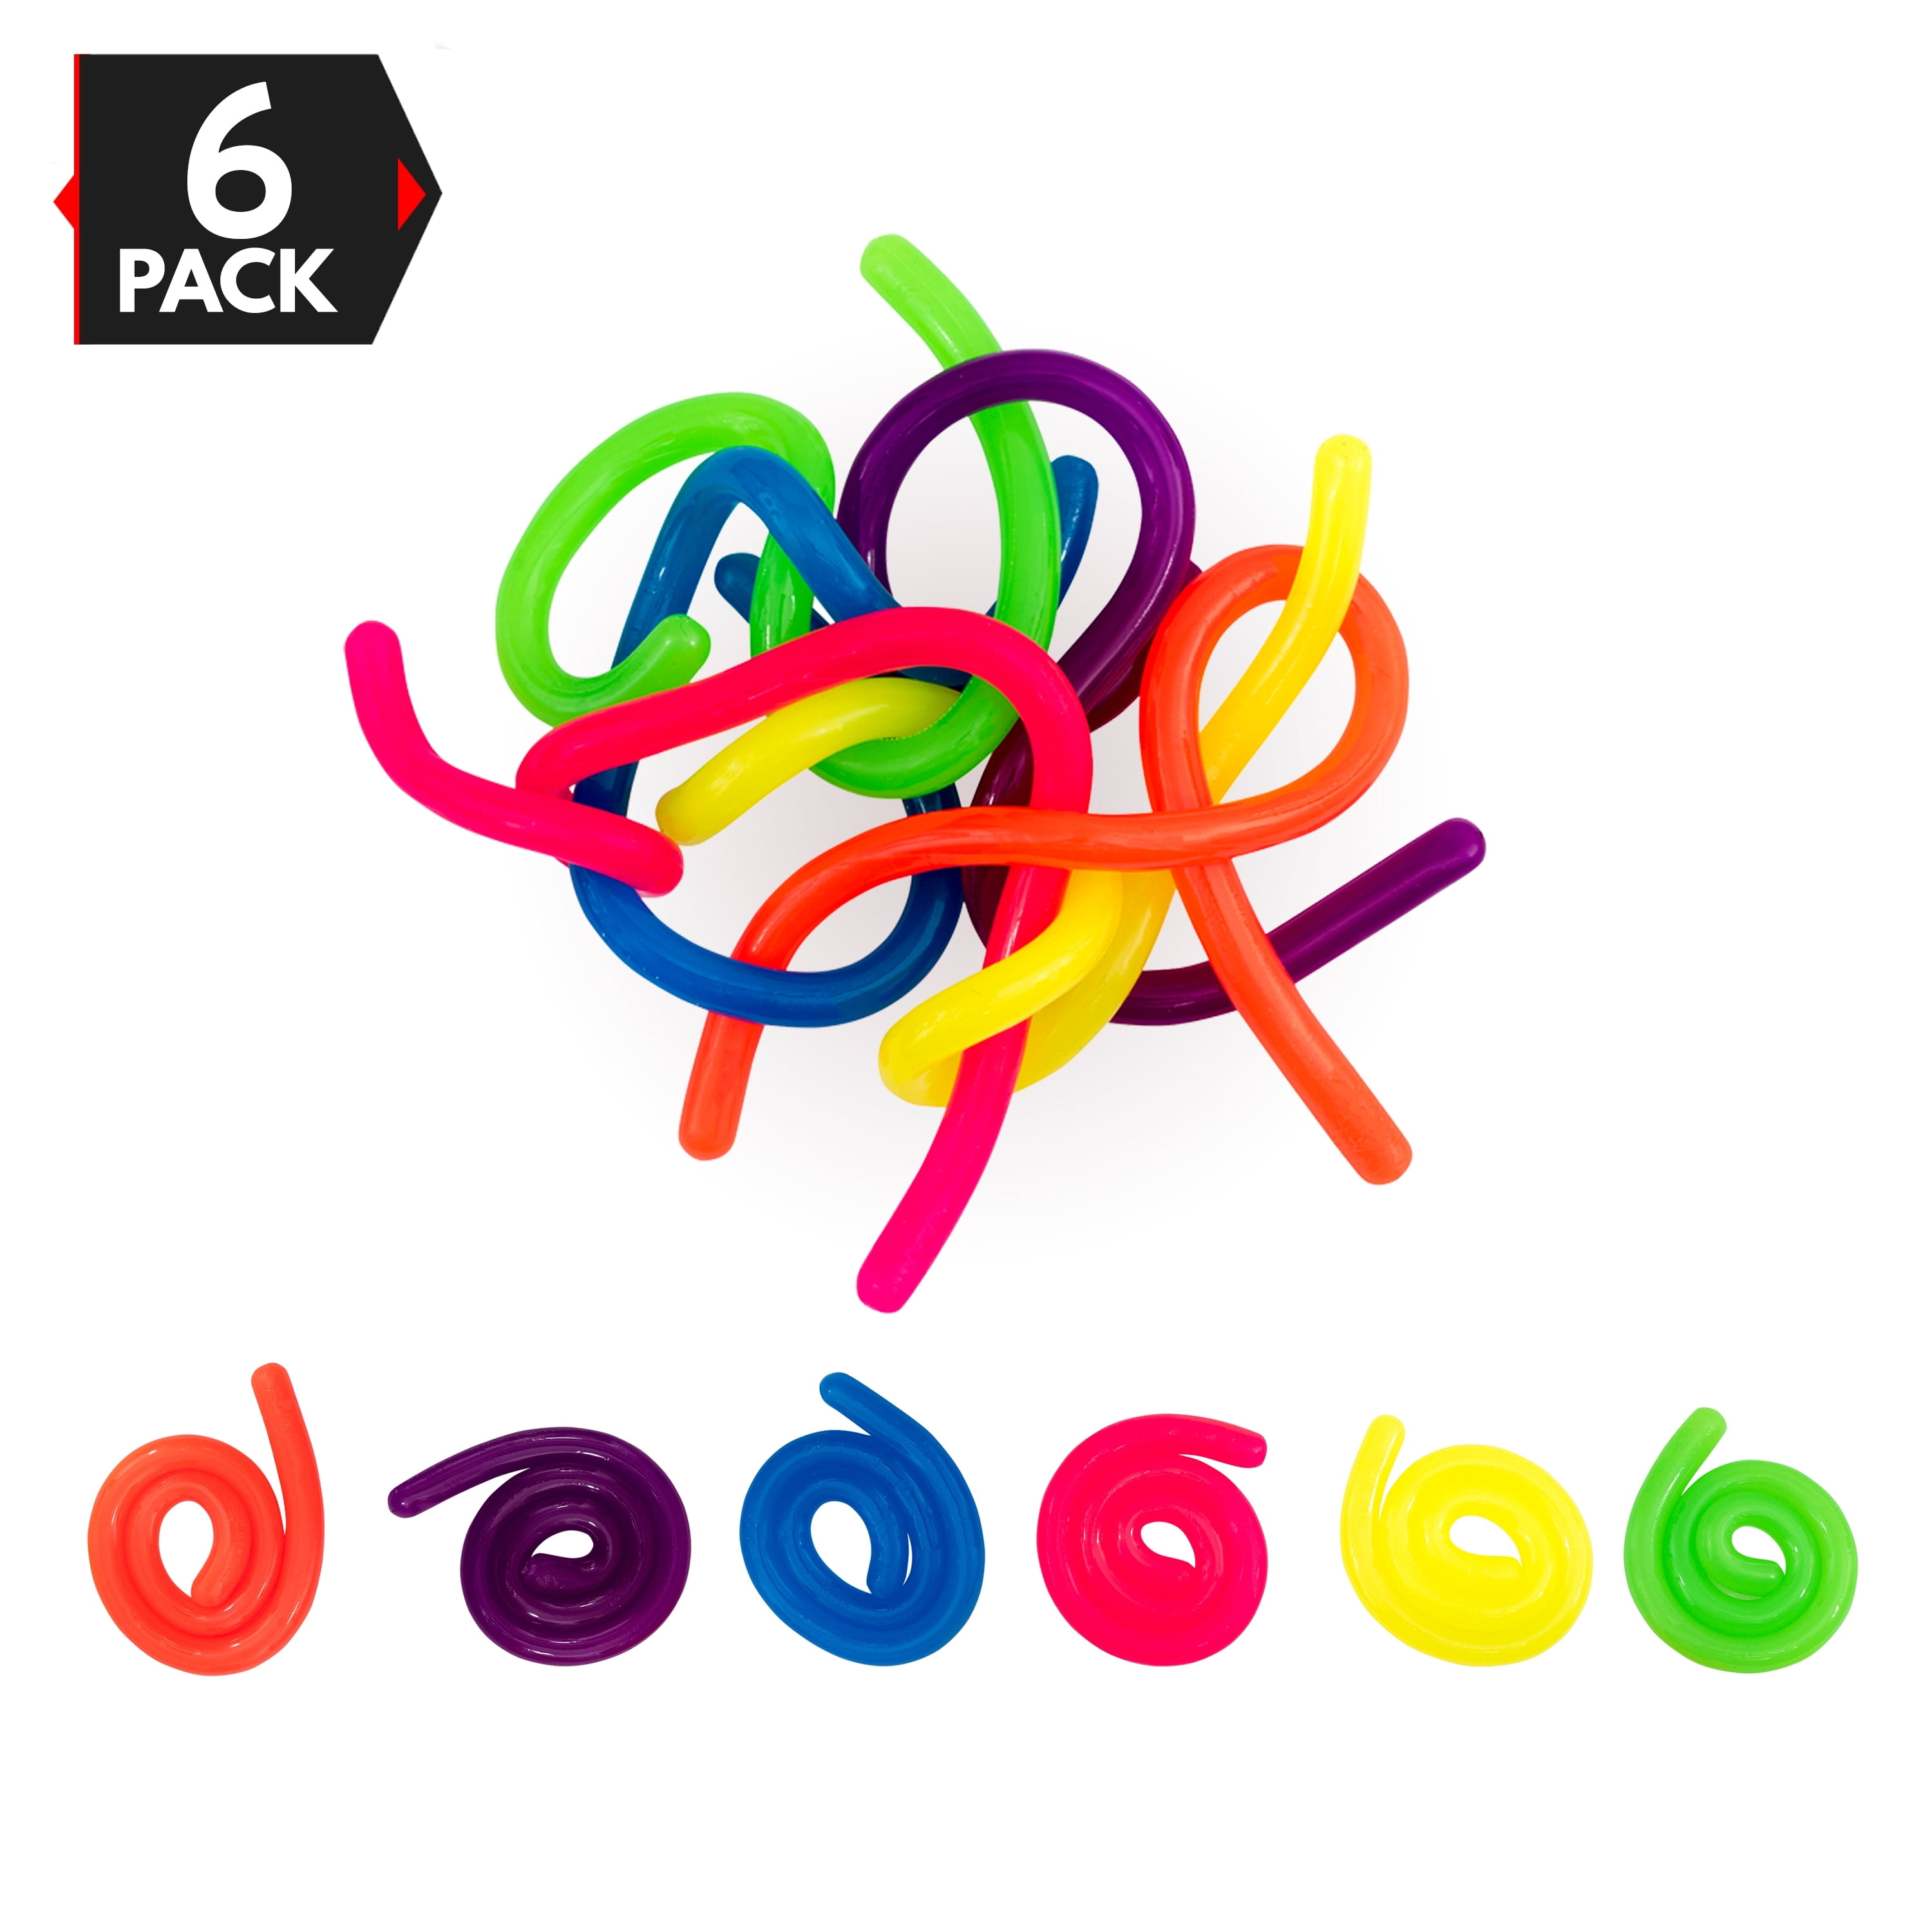 ADHD Autism Stretch Toy Stress Anxiety Reliever Fidget Toy Sensory Toys 5 Pack Colorful Neon Stretch Strings For ADD 